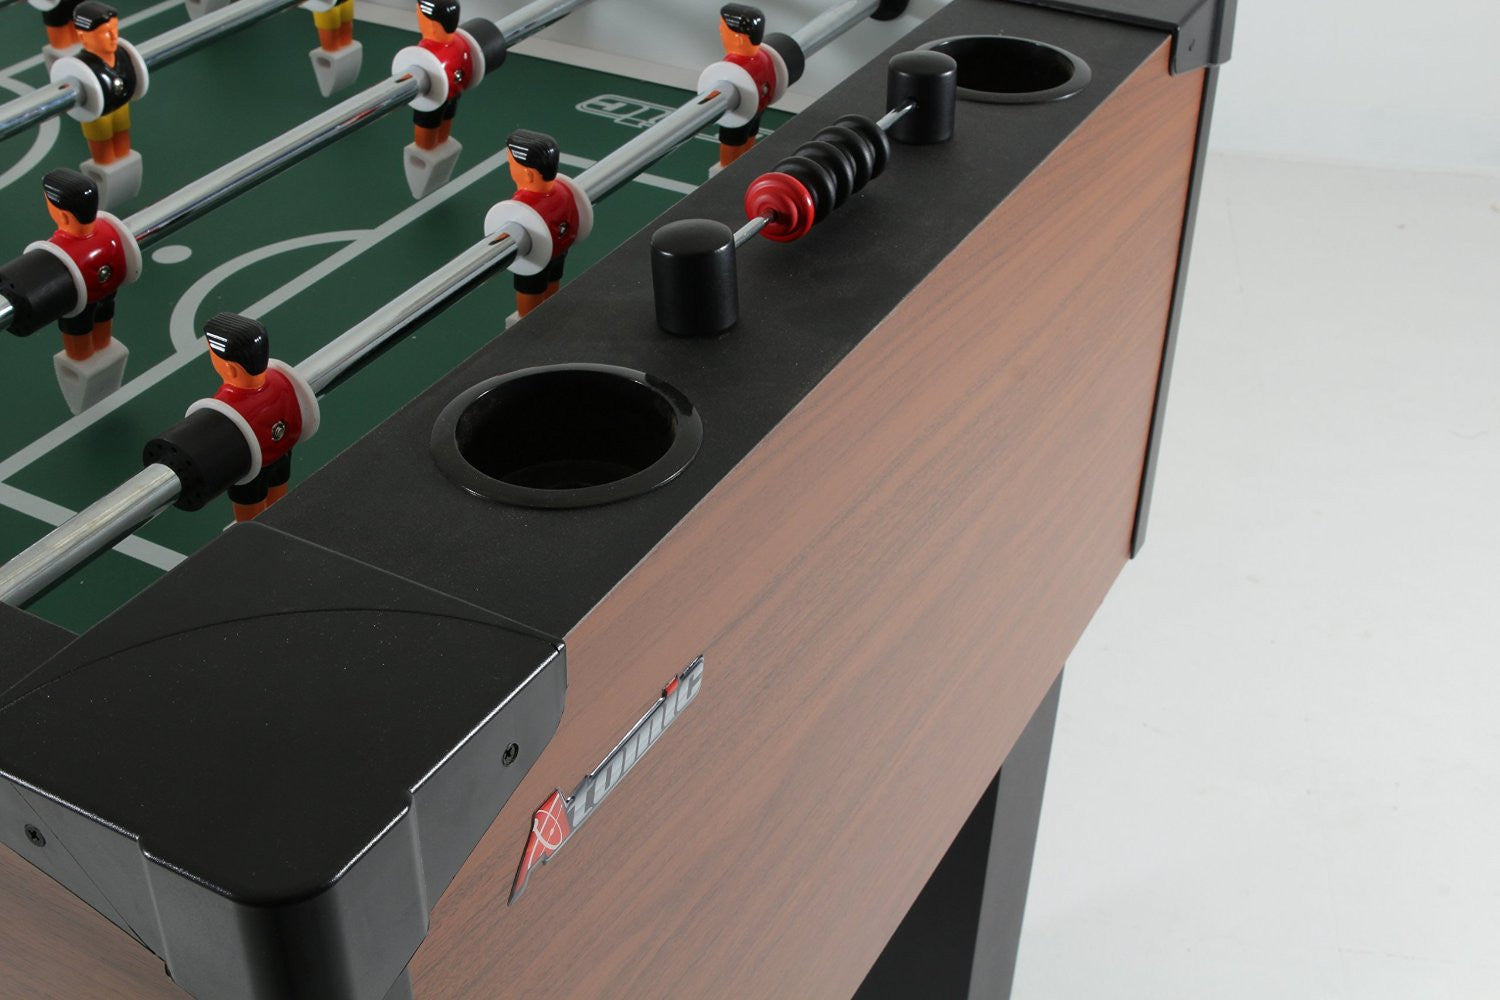 Atomic Gladiator Foosball Table Analog Score Unit by DMI available at Foosball Planet. 